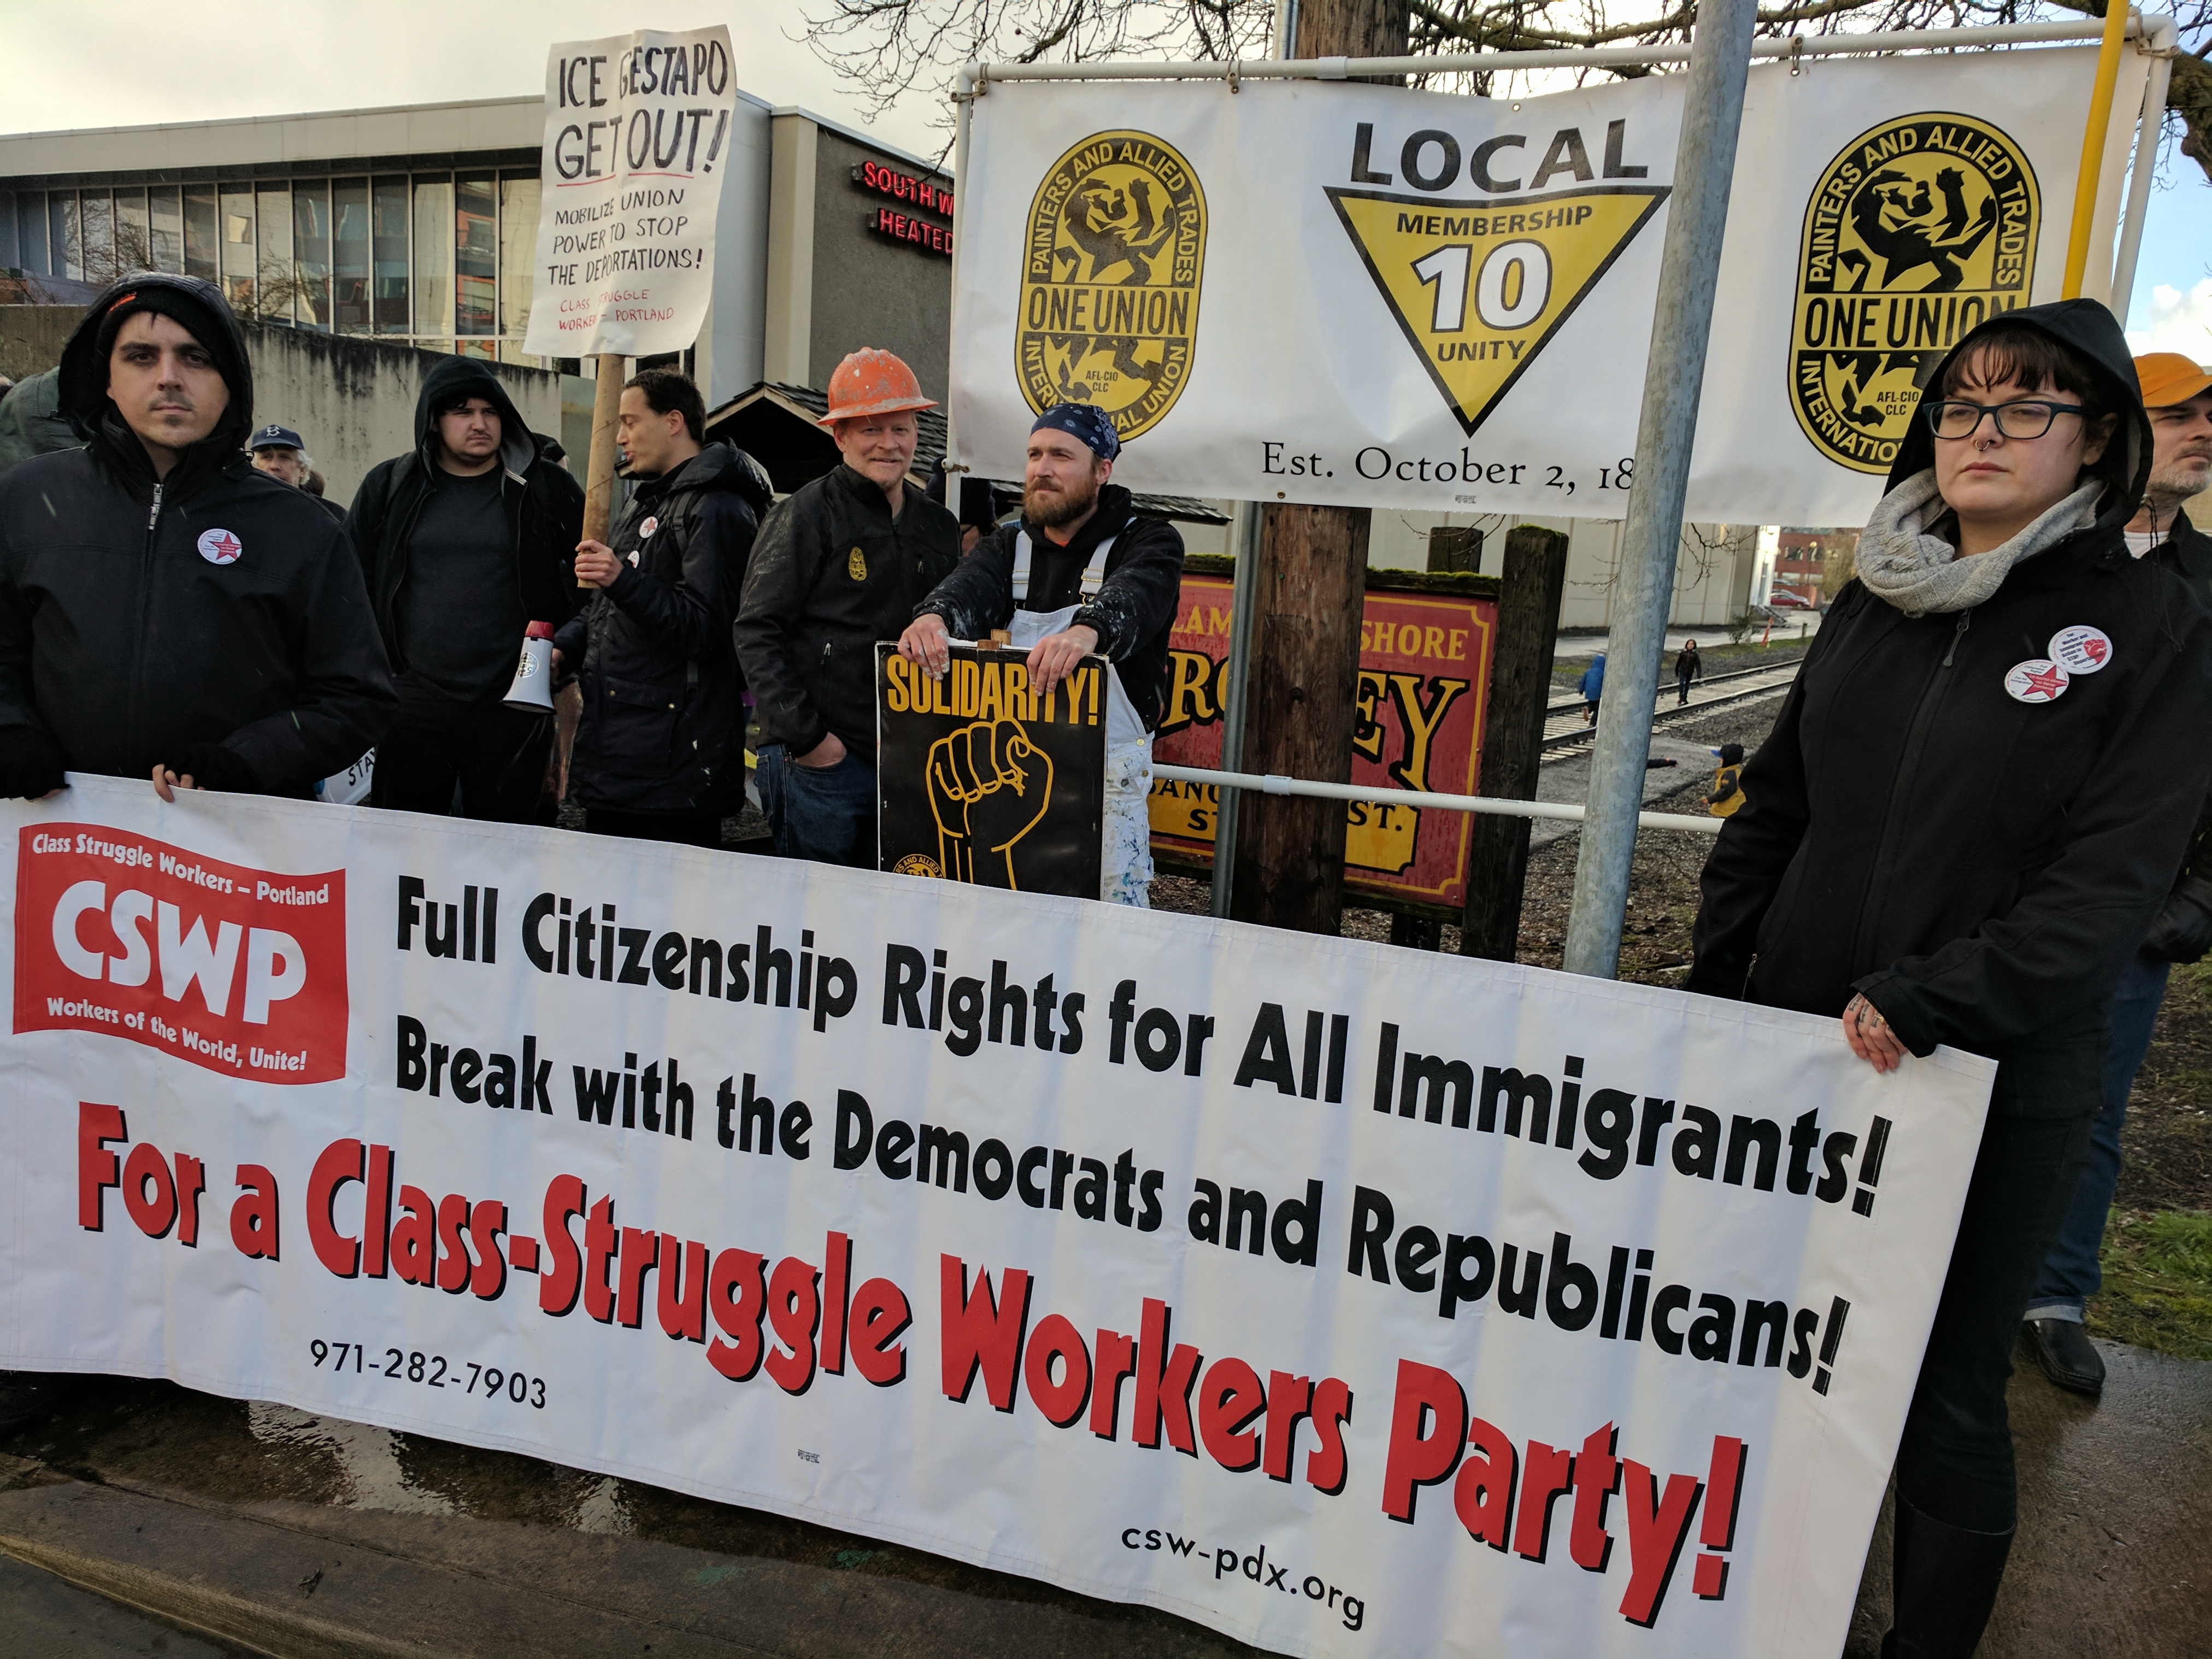 CSWP and IUPAT Local 10 banners at ICE Out of Oregon protest, 6 Mar 2017